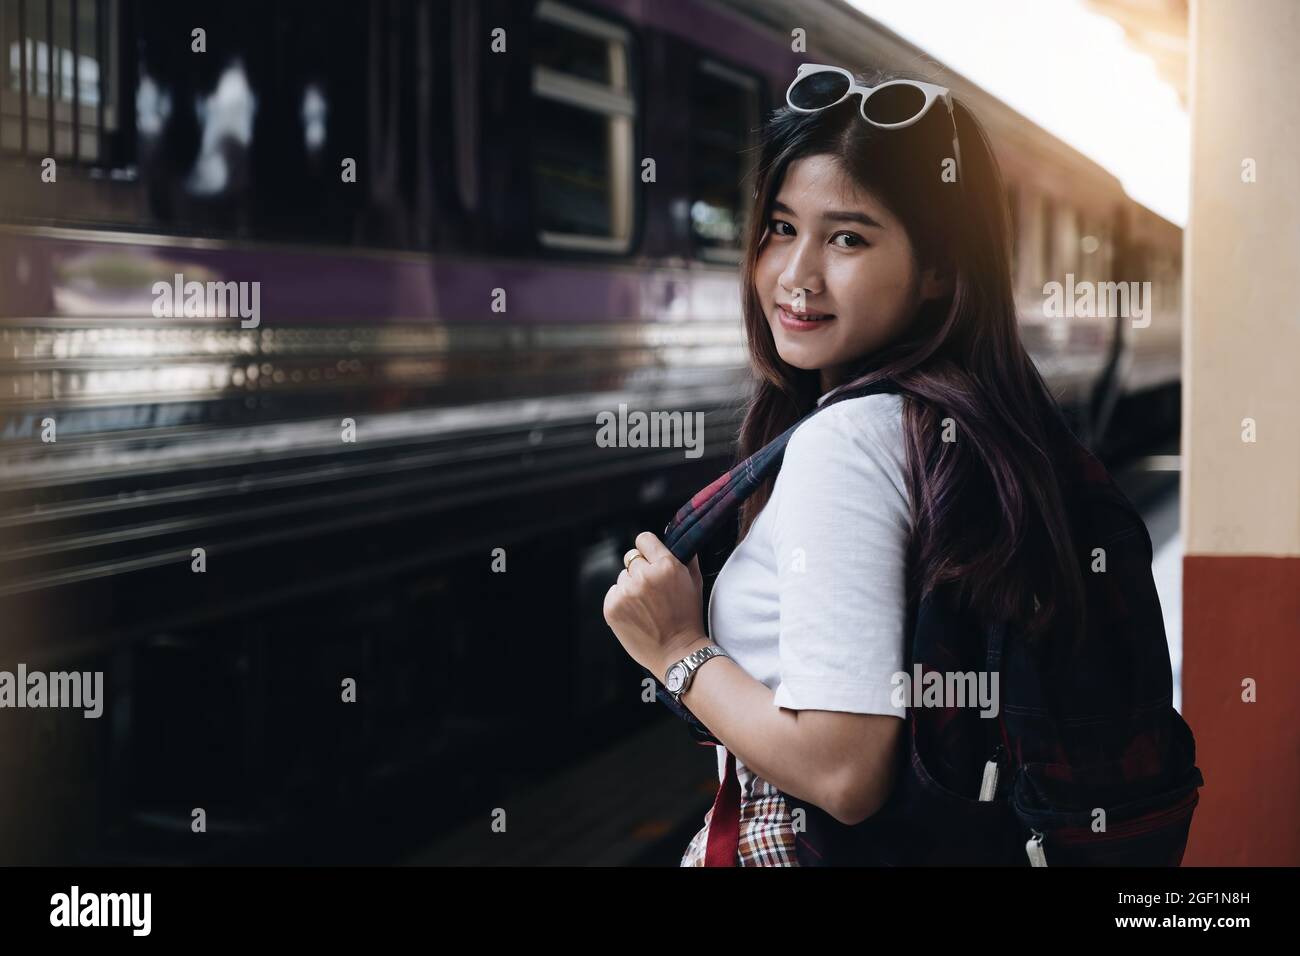 Image of a woman with a rucksack standing at a train station waiting to board a train. concept of solo travel. Stock Photo